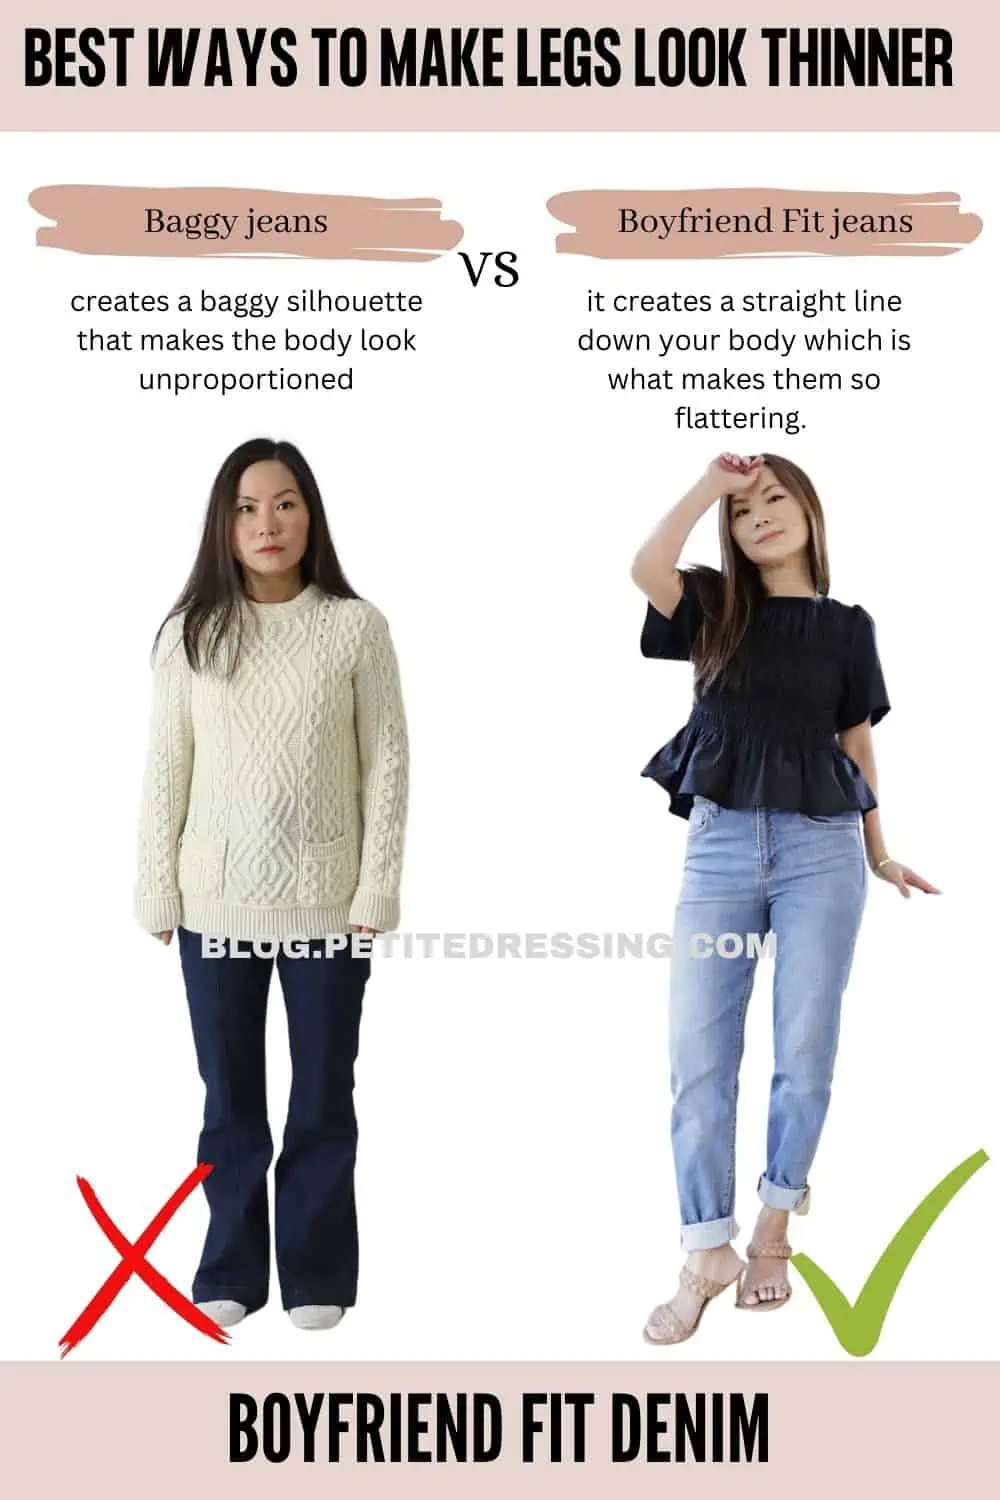 How to make your Legs Appear Slimmer with Tights? — UNIQSO